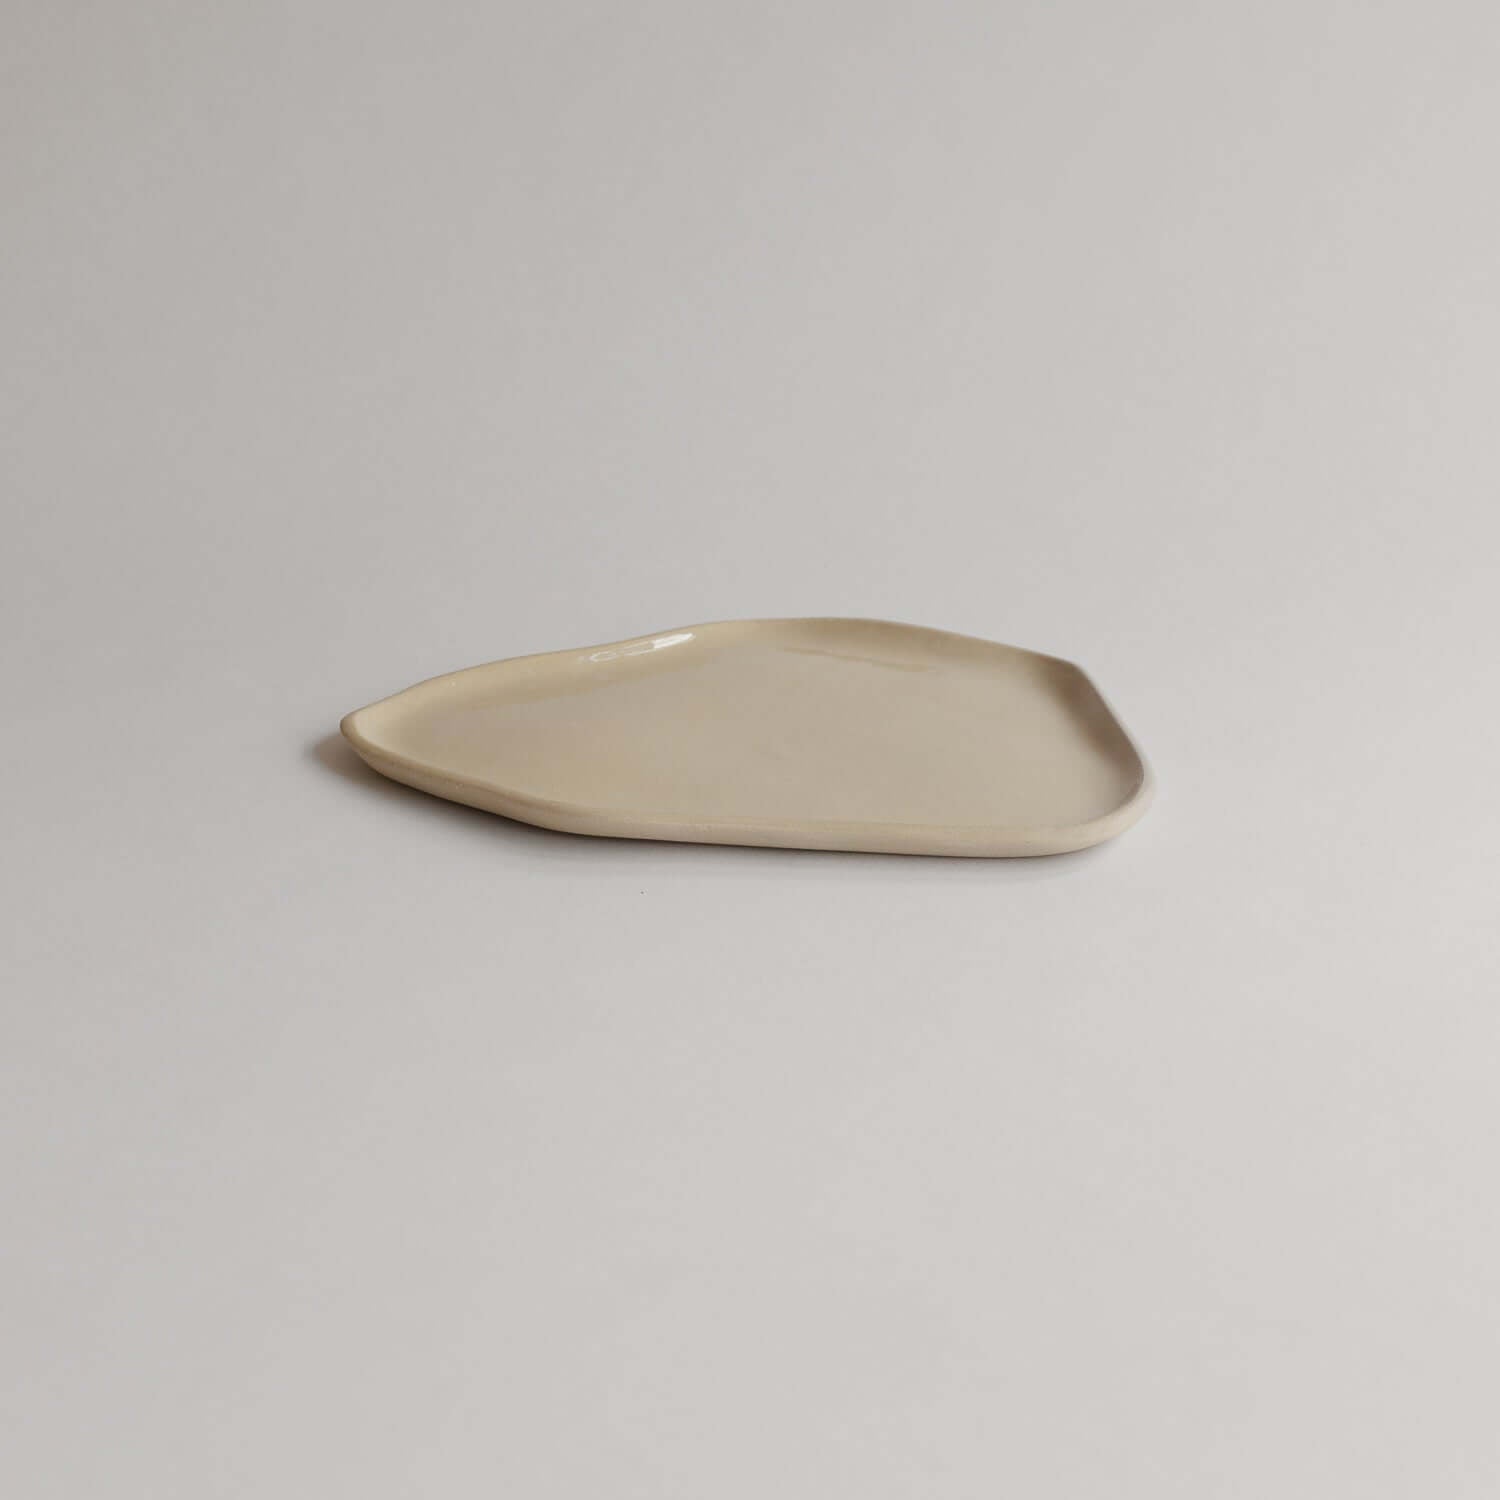 Discover the charm of our Creme Handbuilding Tray. Unique, lovingly handcrafted grey stoneware with food-safe glaze. Perfectly sized at 18.5 cm for your home. von viola beuscher ceramics